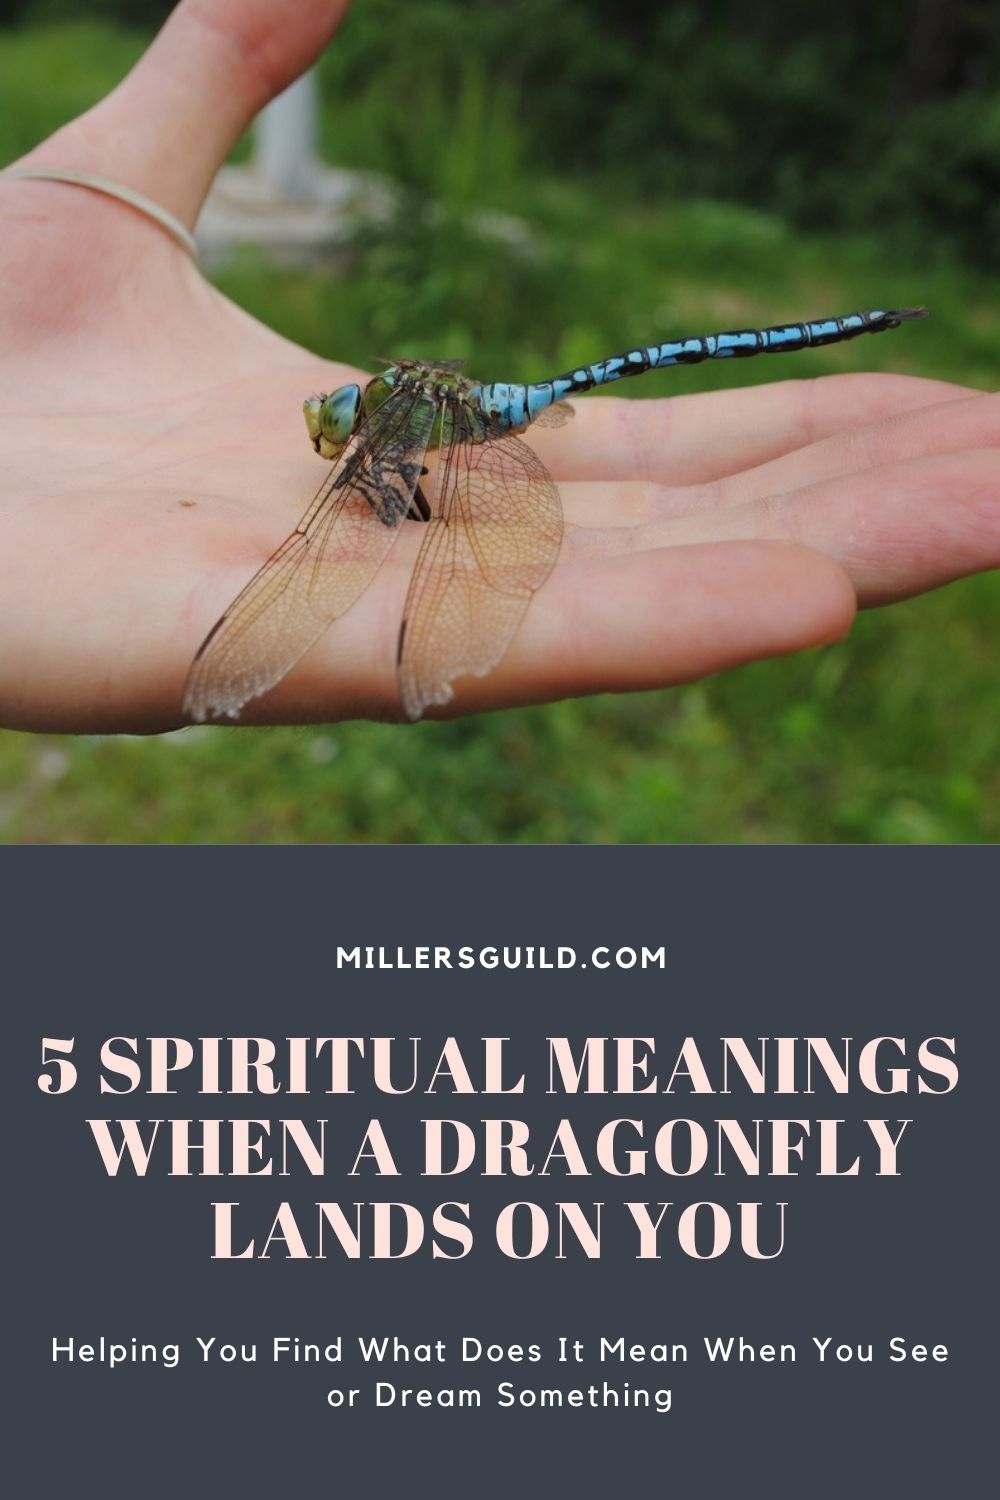 5 Spiritual Meanings When a Dragonfly Lands on You 1